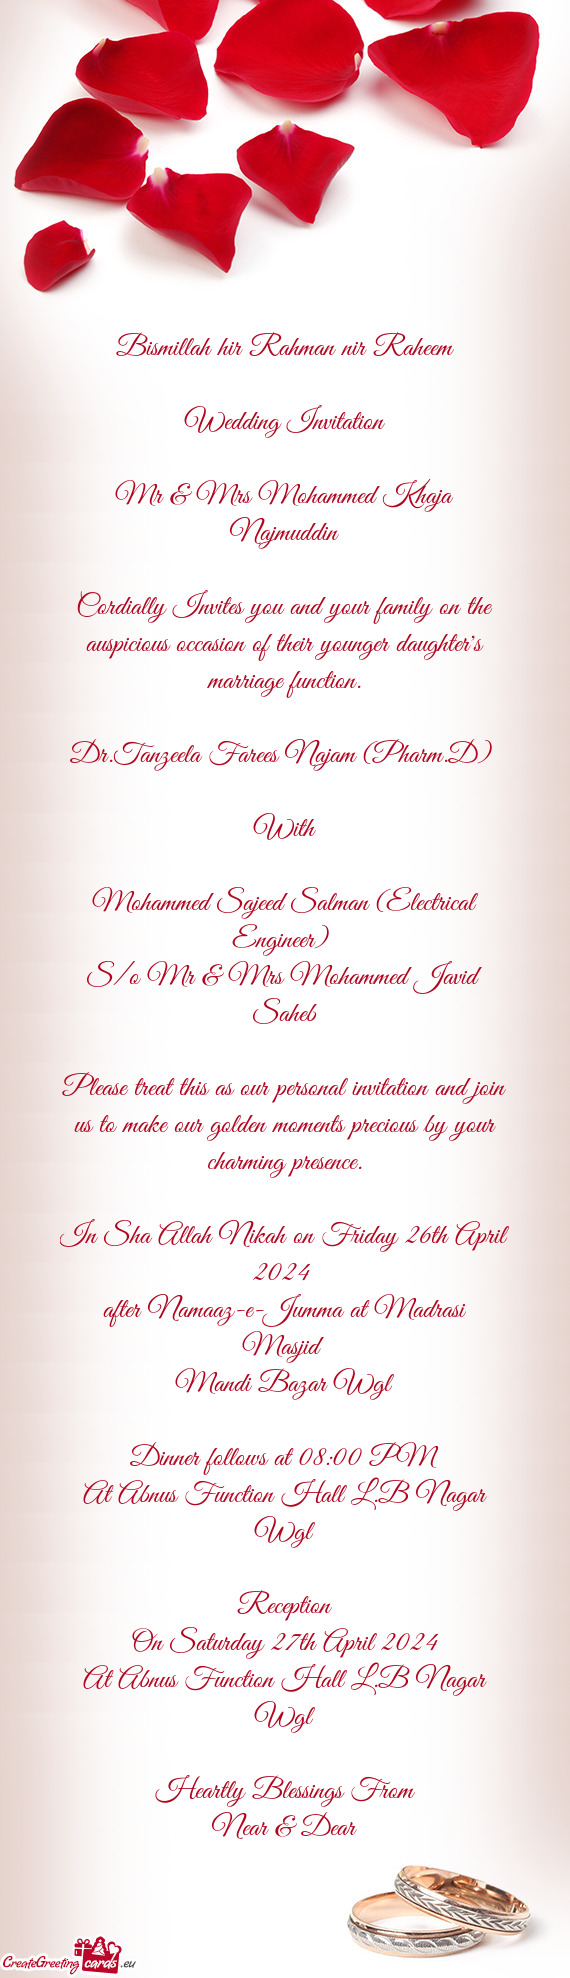 Cordially Invites you and your family on the auspicious occasion of their younger daughter